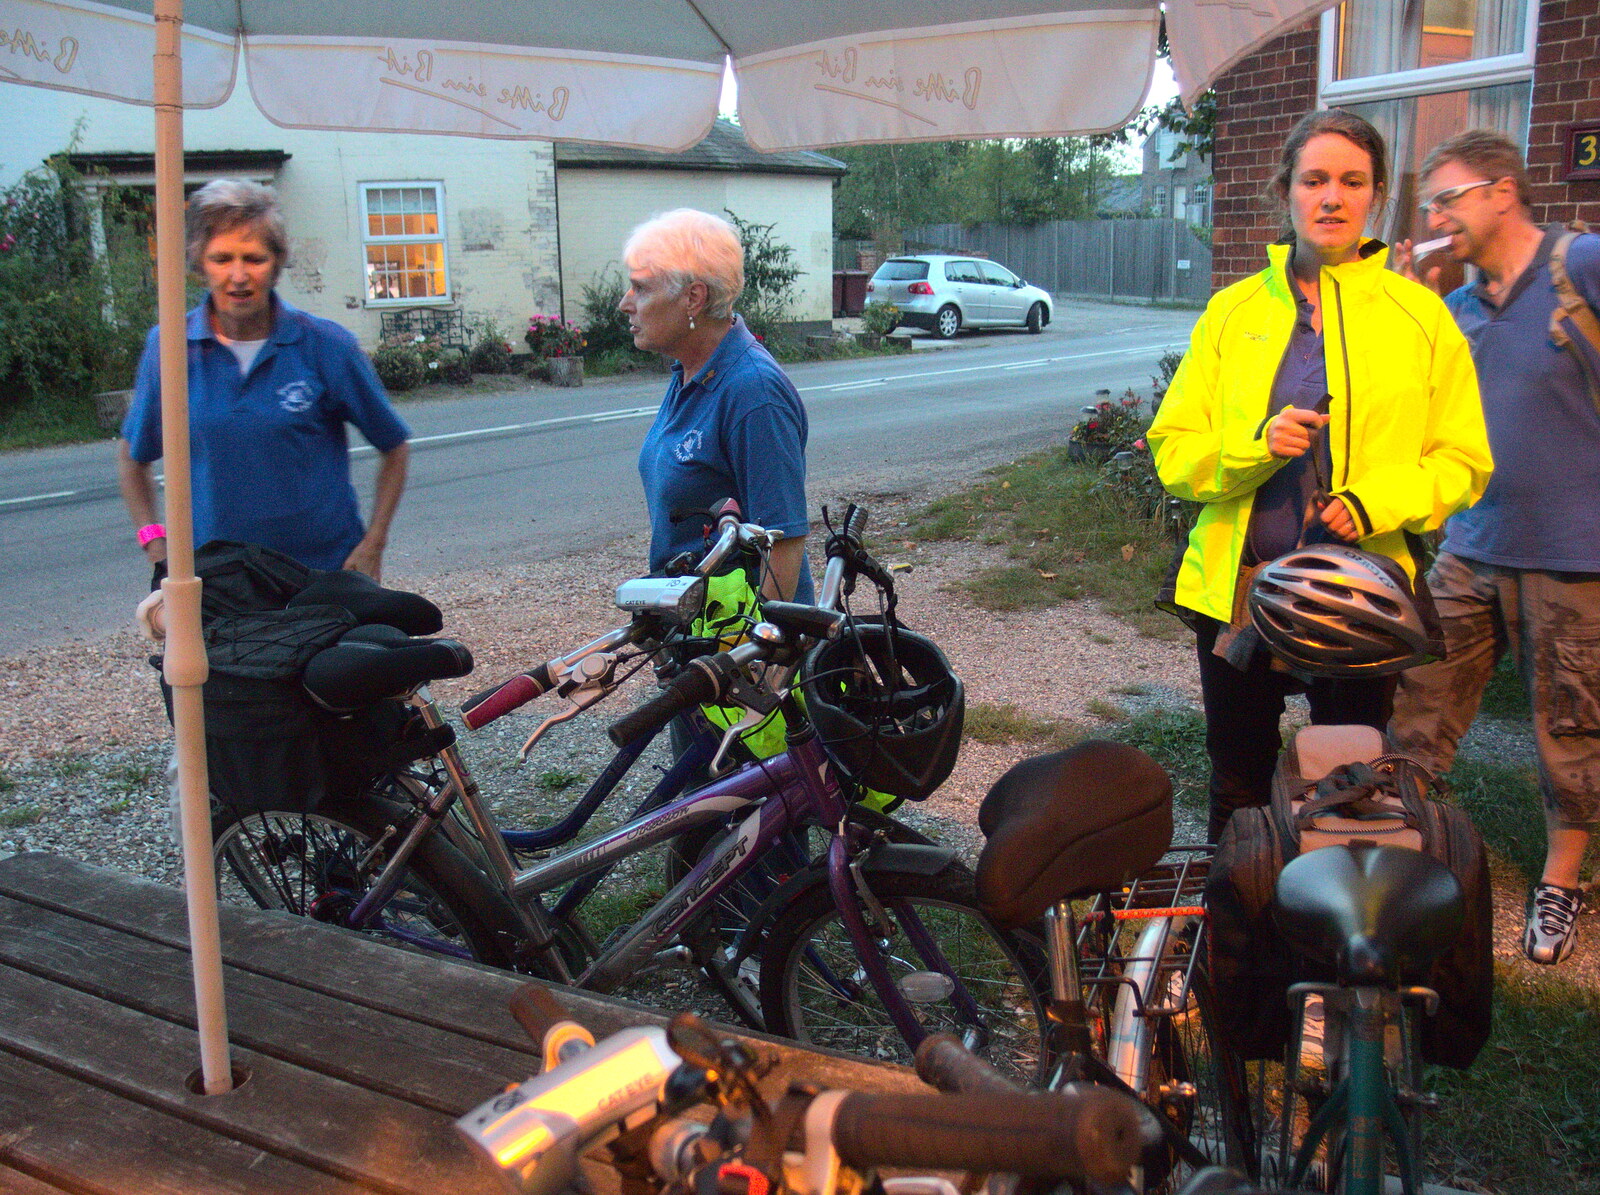 The gang at the Mellis Railway Tavern from Bike Rides and the BSCC at the Railway, Mellis and Brome, Suffolk - 18th September 2014